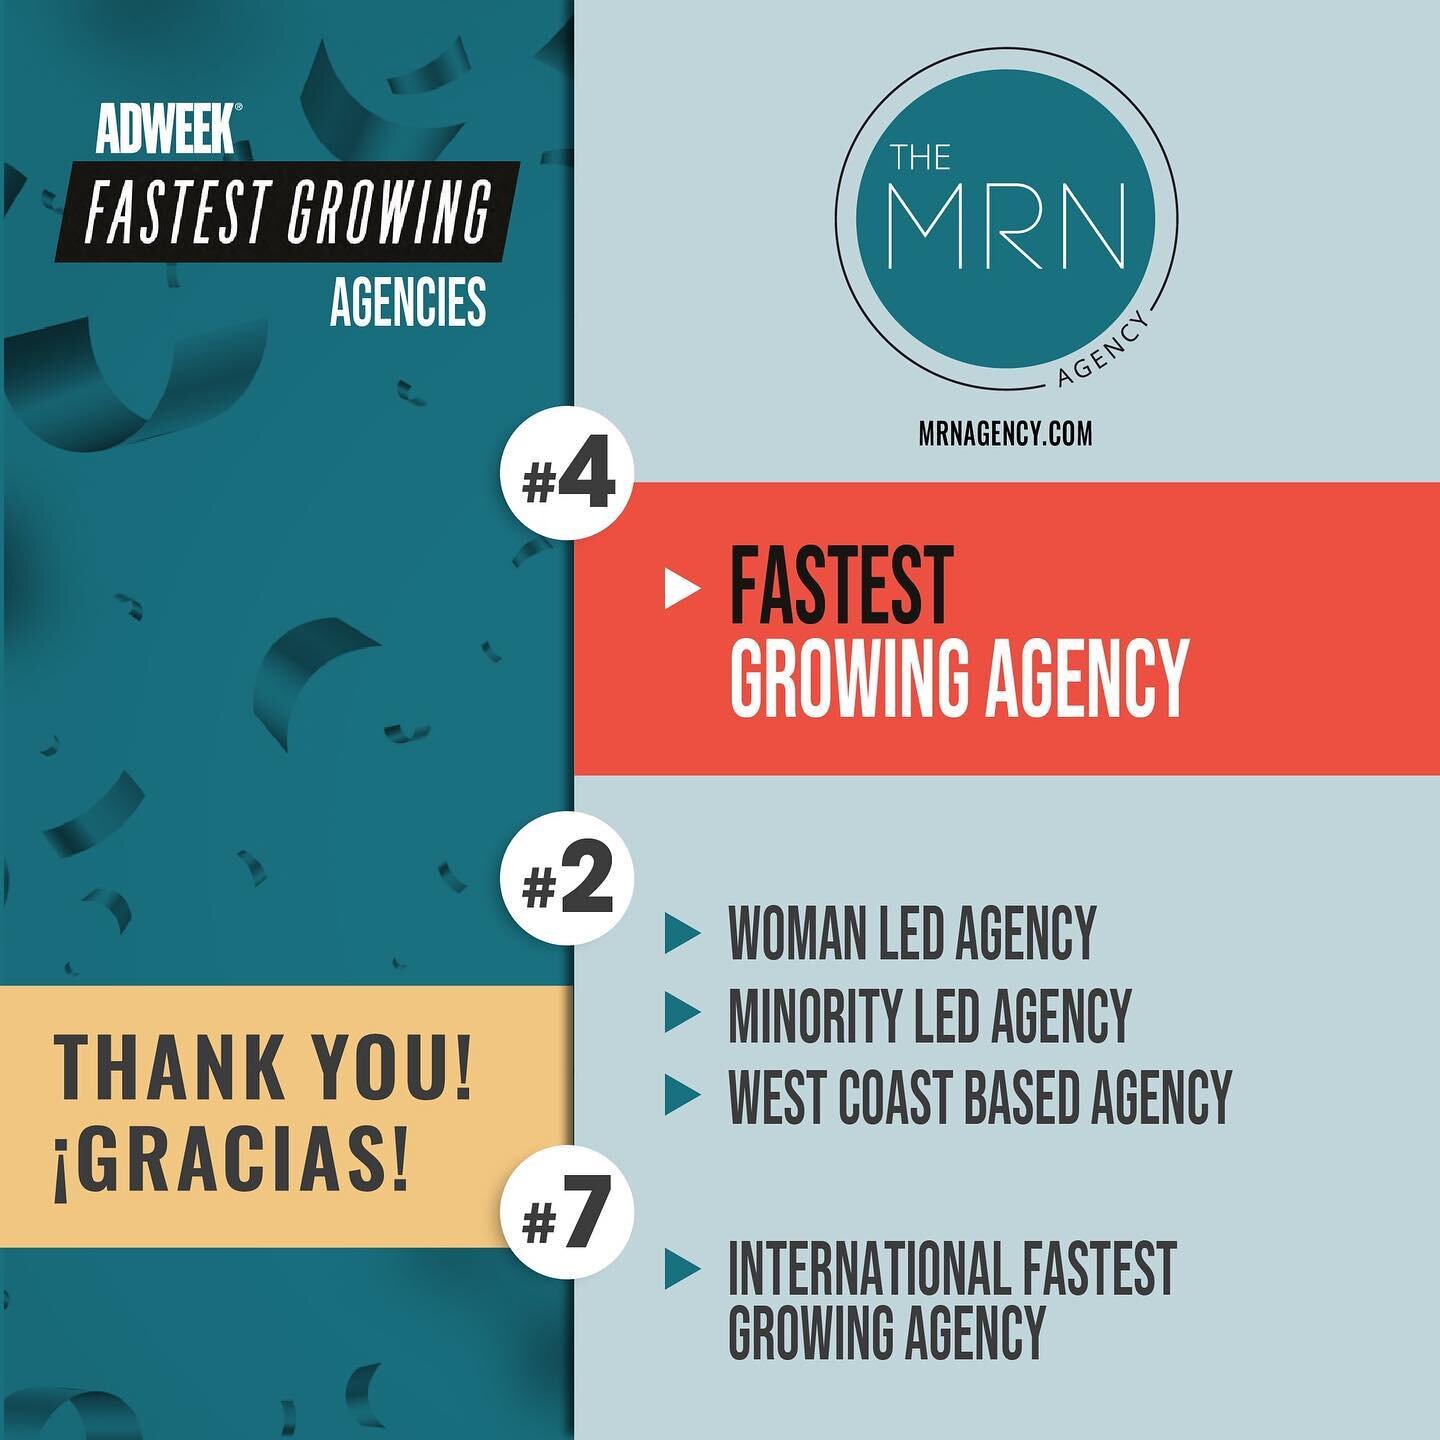 🚨We are thrilled to announce that The MRN Agency has been recognized by @adweek as #4 on the 75 Fastest Growing Agencies 2022 list! 🎉🍾

We are humbled by this accolade and especially appreciative to our clients who have believed in our small agenc